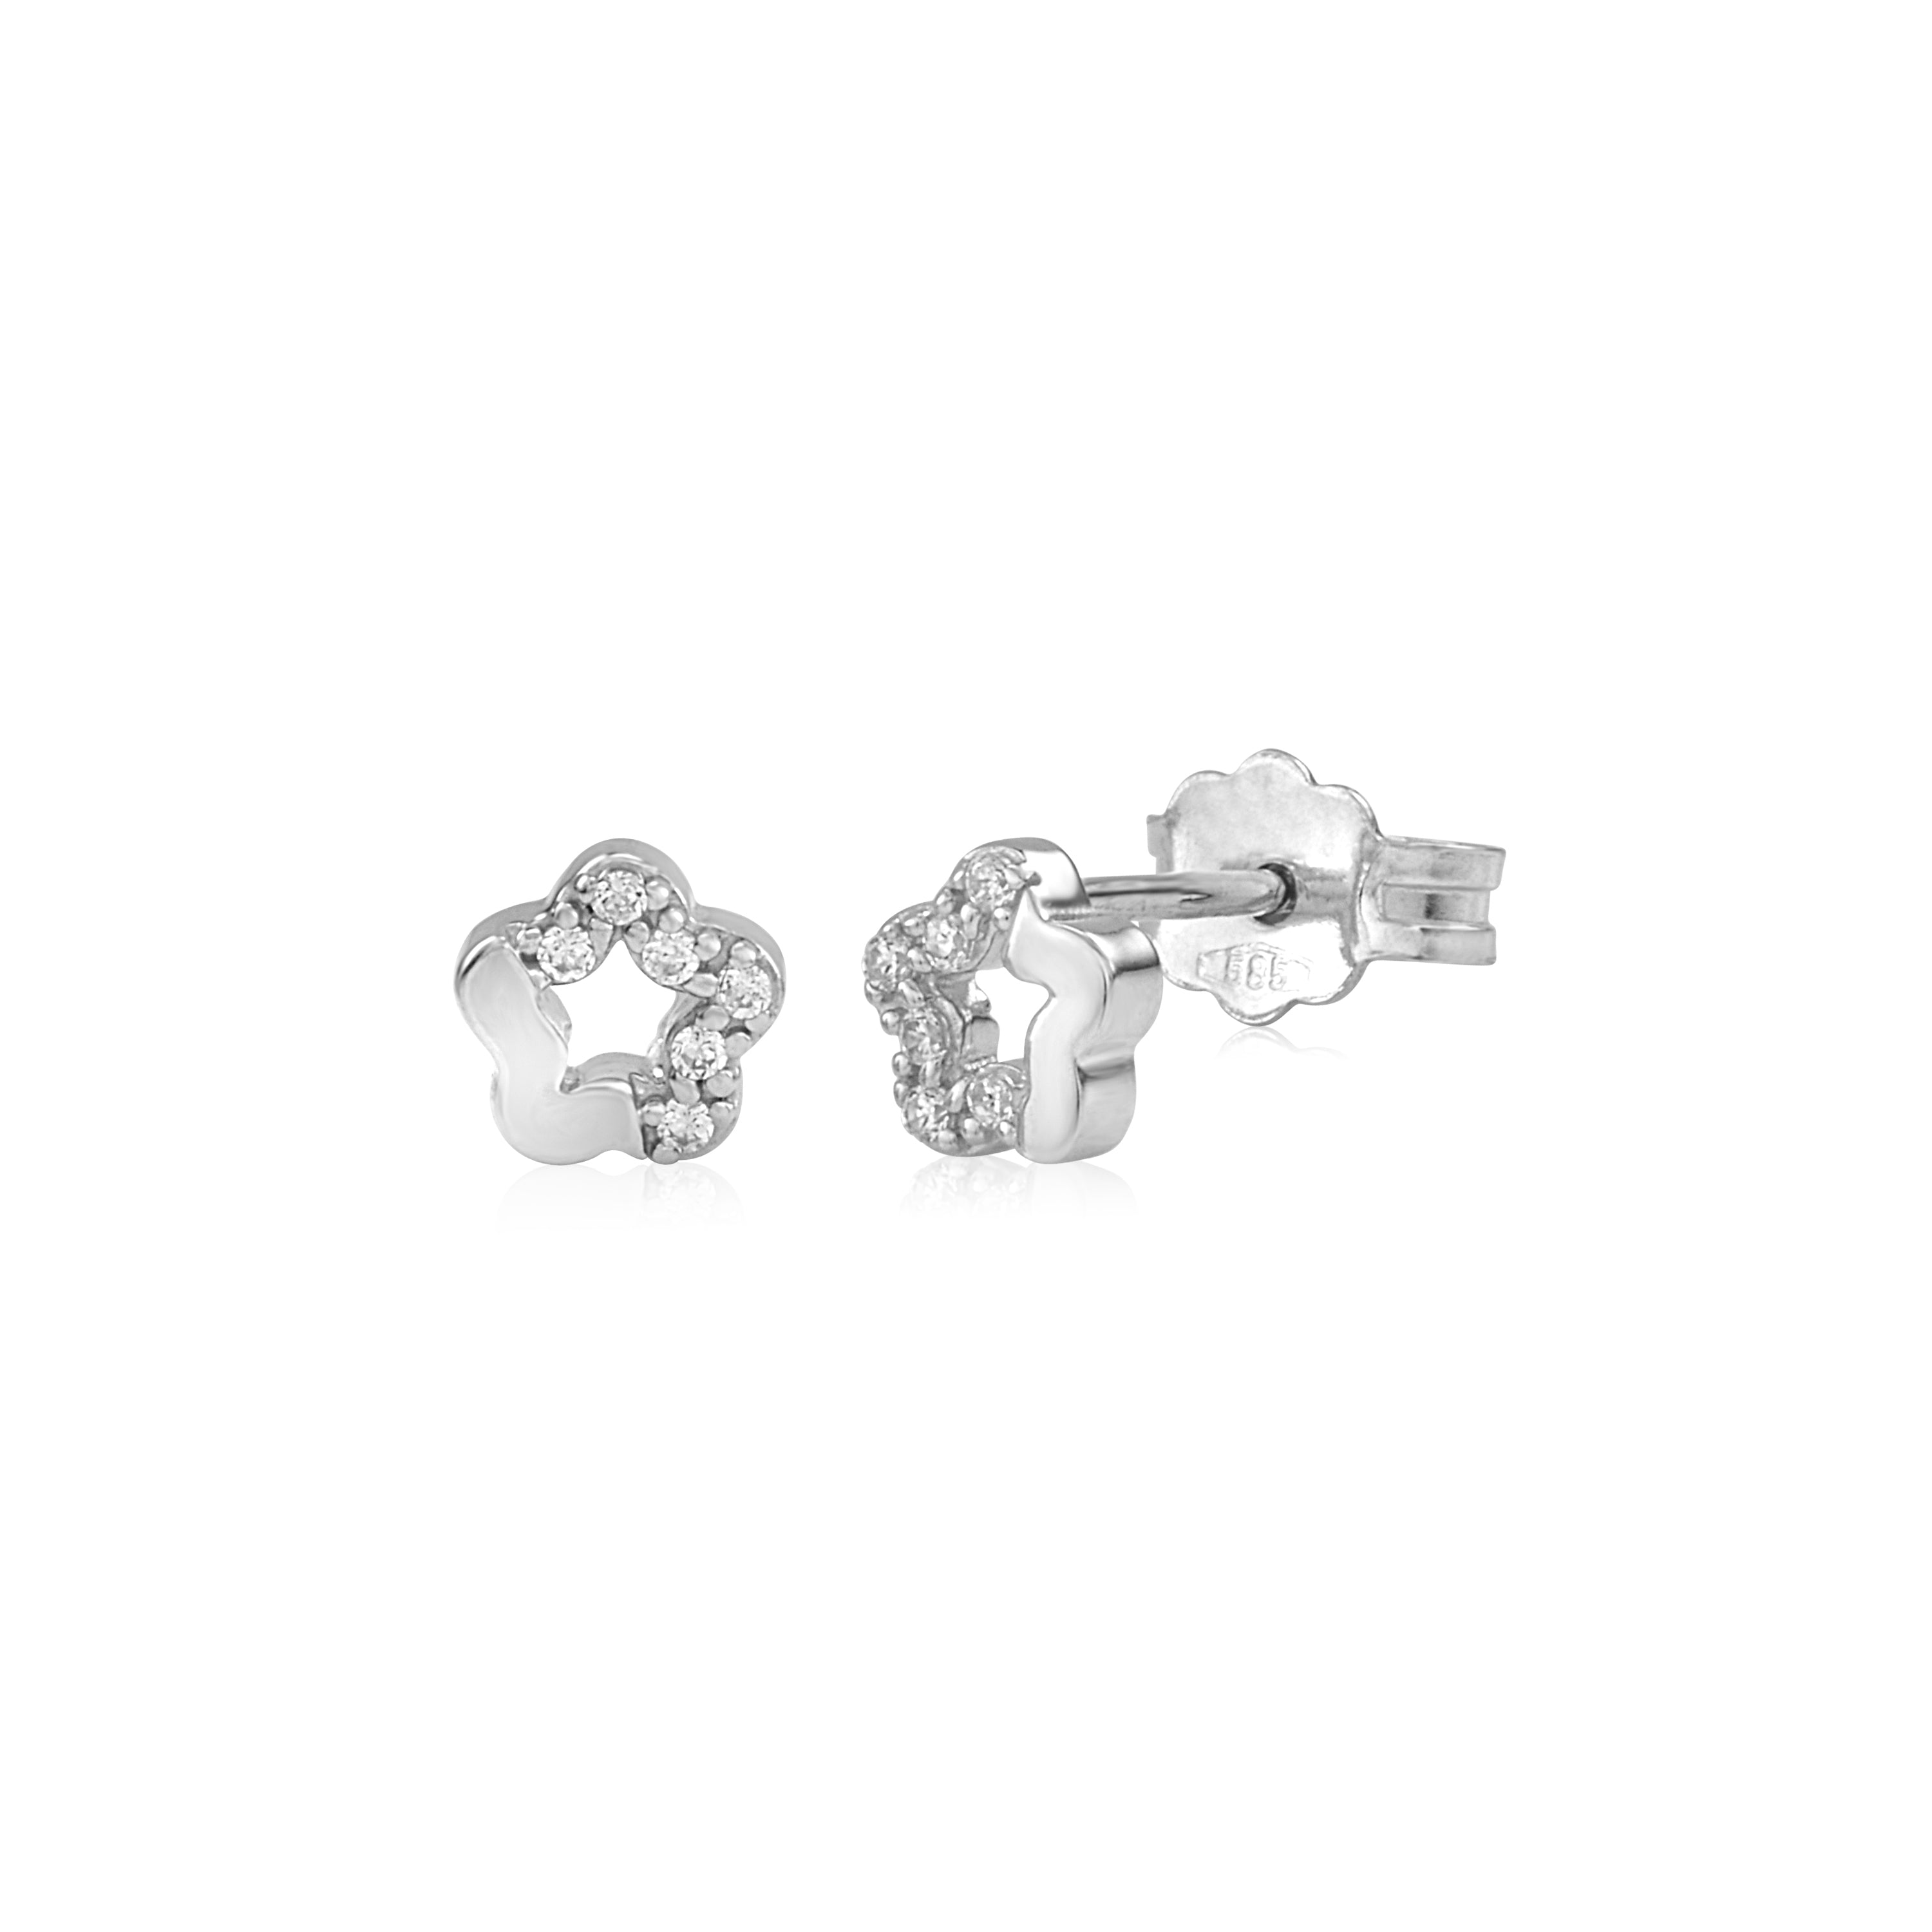 UNICORNJ 14K Yellow or White Gold Children's Kids Baby Tiny Flower Post Earrings Half Polished Half CZ's Italy